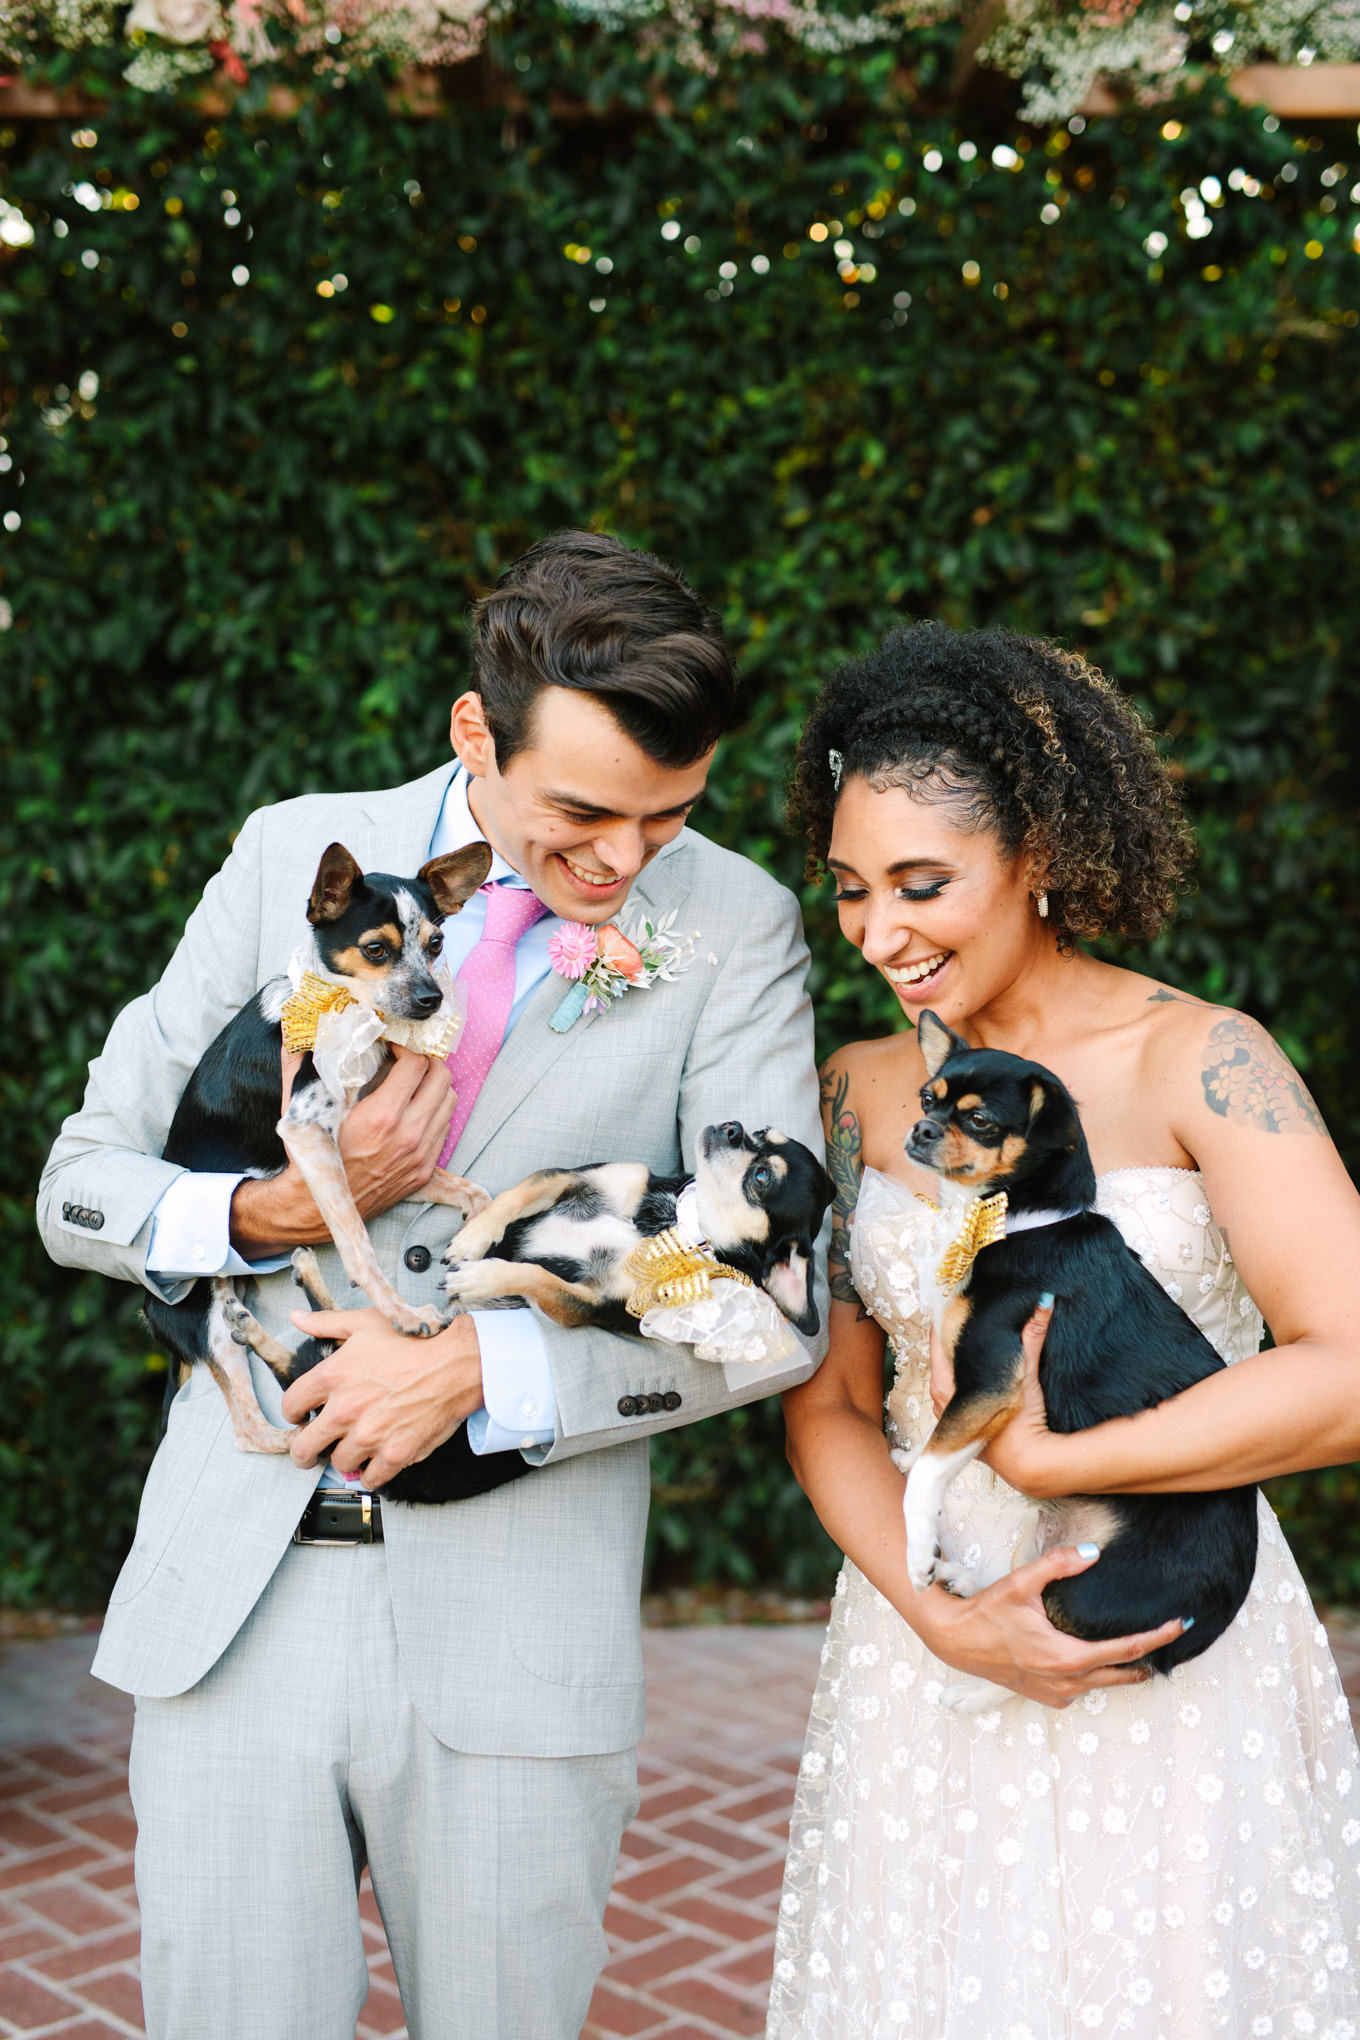 Wedding photo with dogs | Colorful pop-up micro wedding at The Ruby Street Los Angeles featured on Green Wedding Shoes | Colorful and elevated photography for fun-loving couples in Southern California | #colorfulwedding #popupwedding #weddingphotography #microwedding Source: Mary Costa Photography | Los Angeles